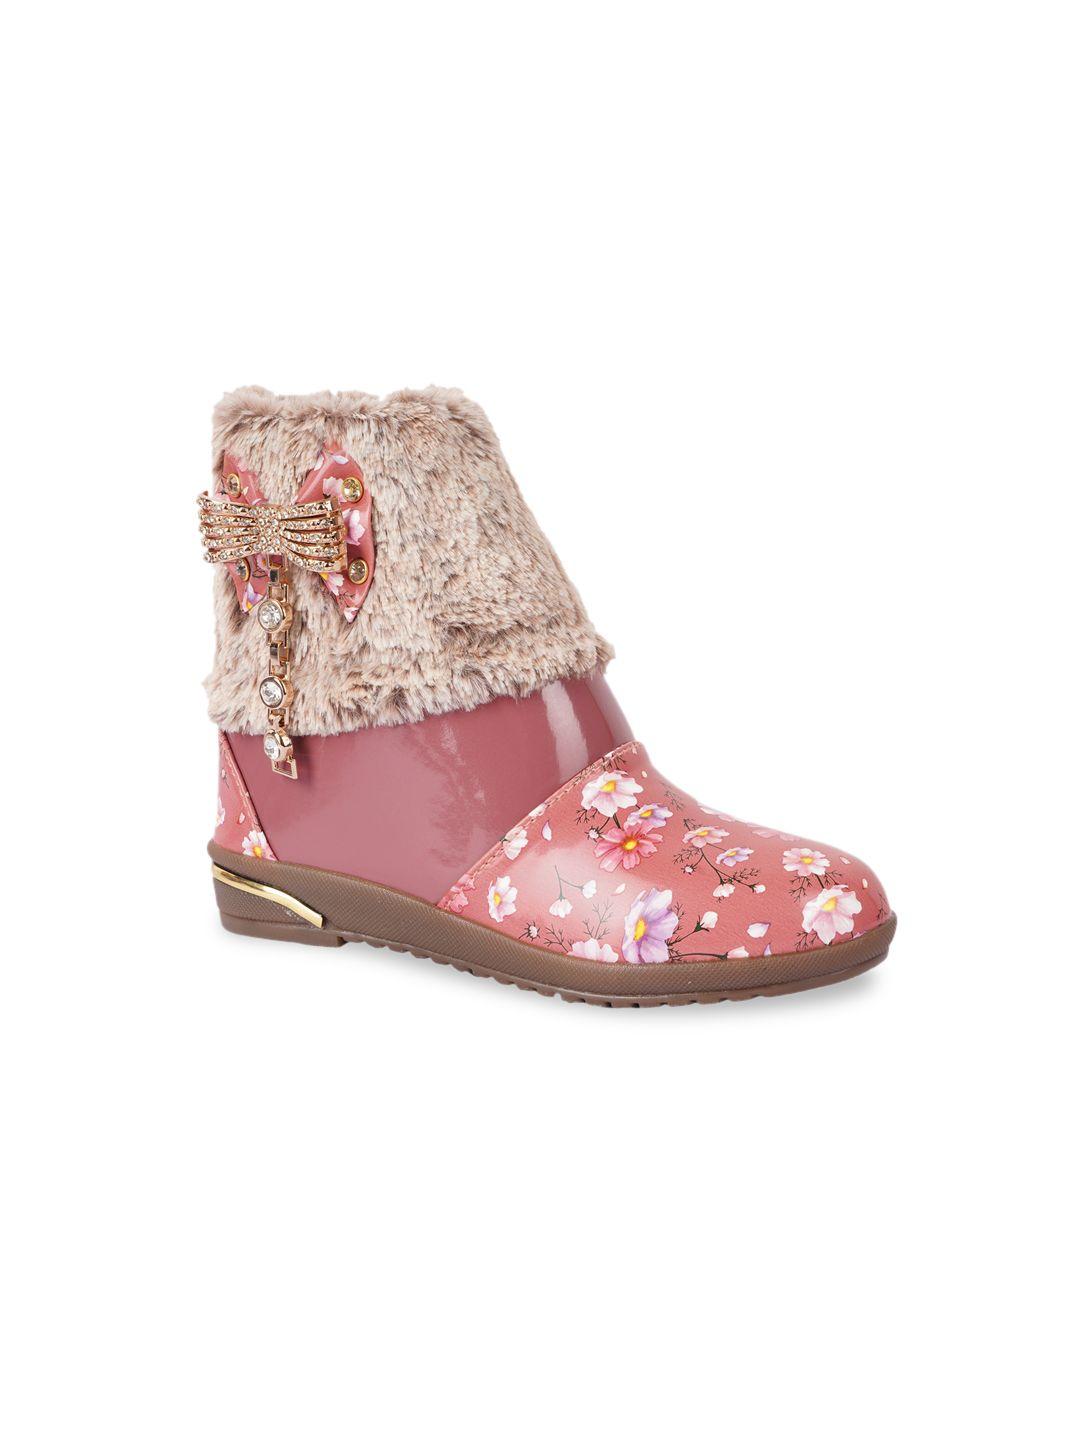 baesd-girls-embellished-faux-fur-trim-winter-boots